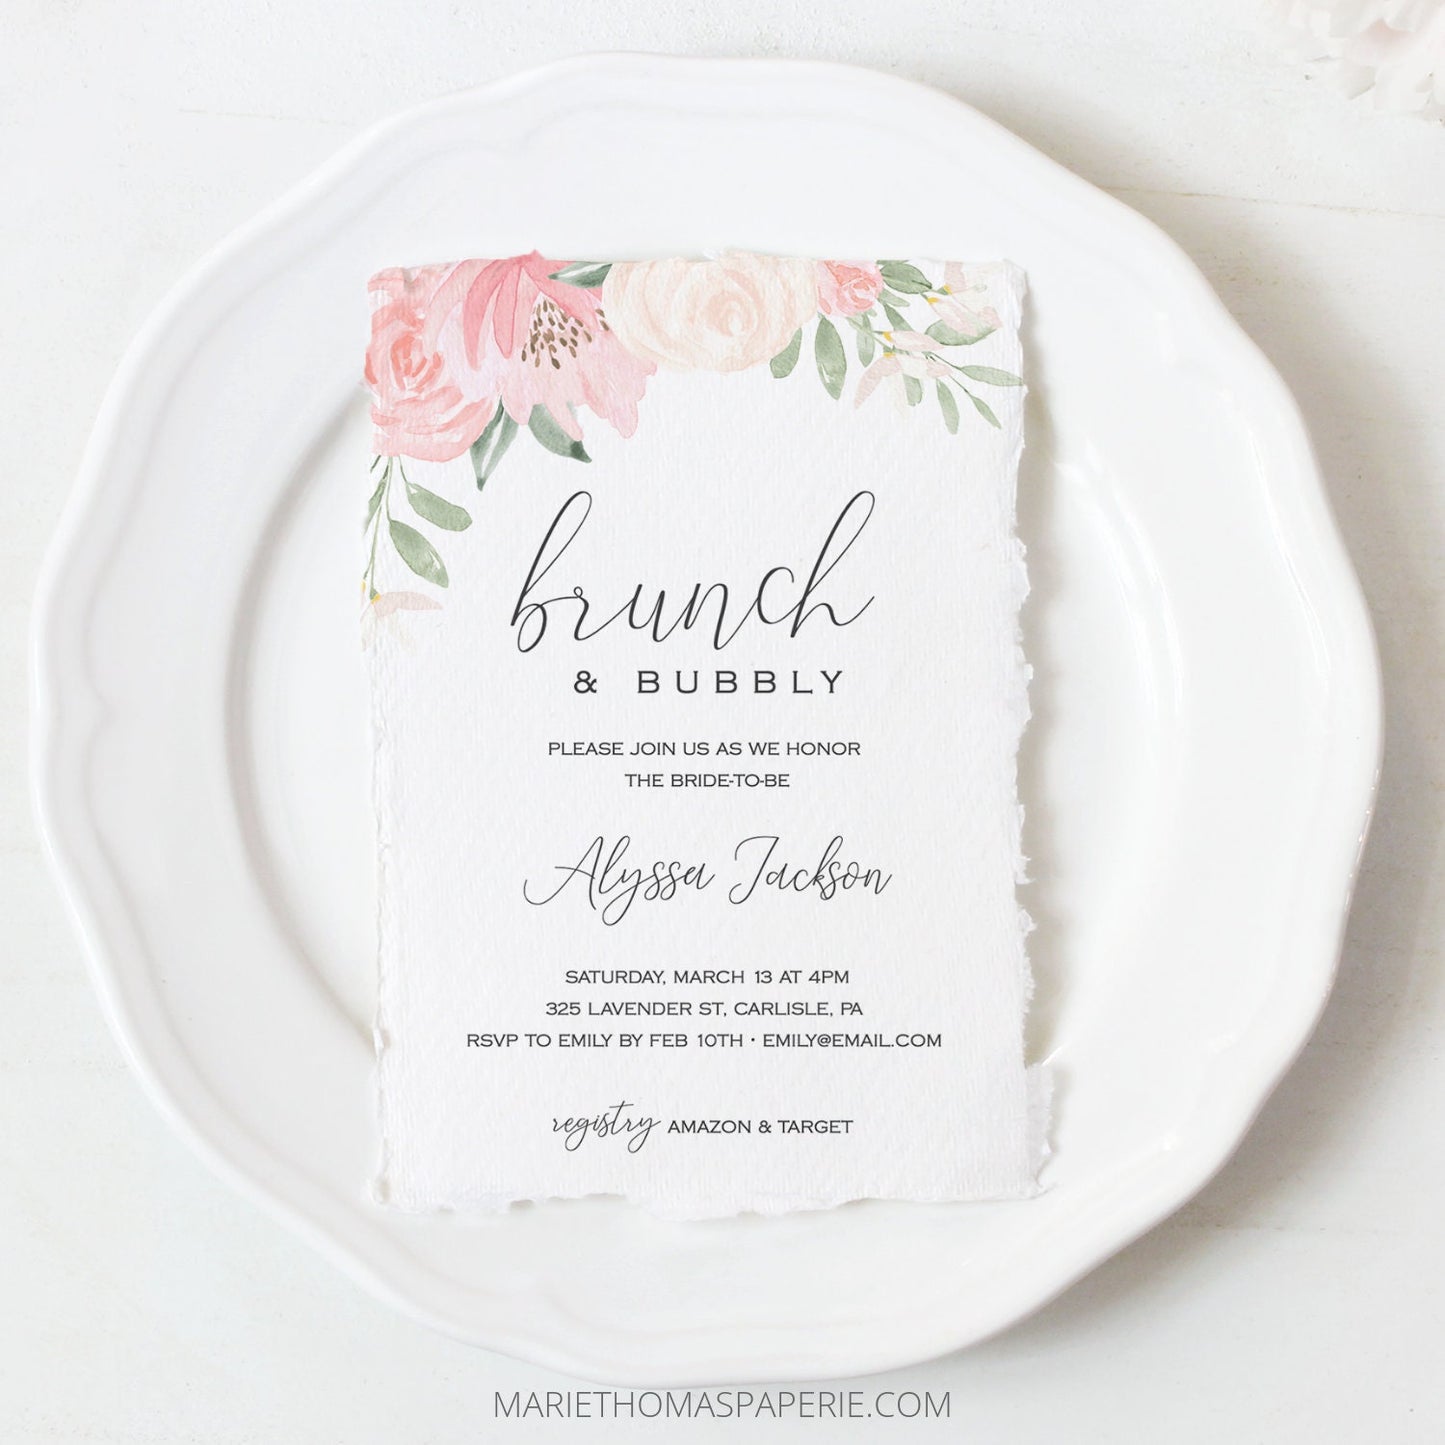 Editable Brunch and Bubbly Bridal Shower Invitation Blush Pink Floral Bridal Shower Invite Template